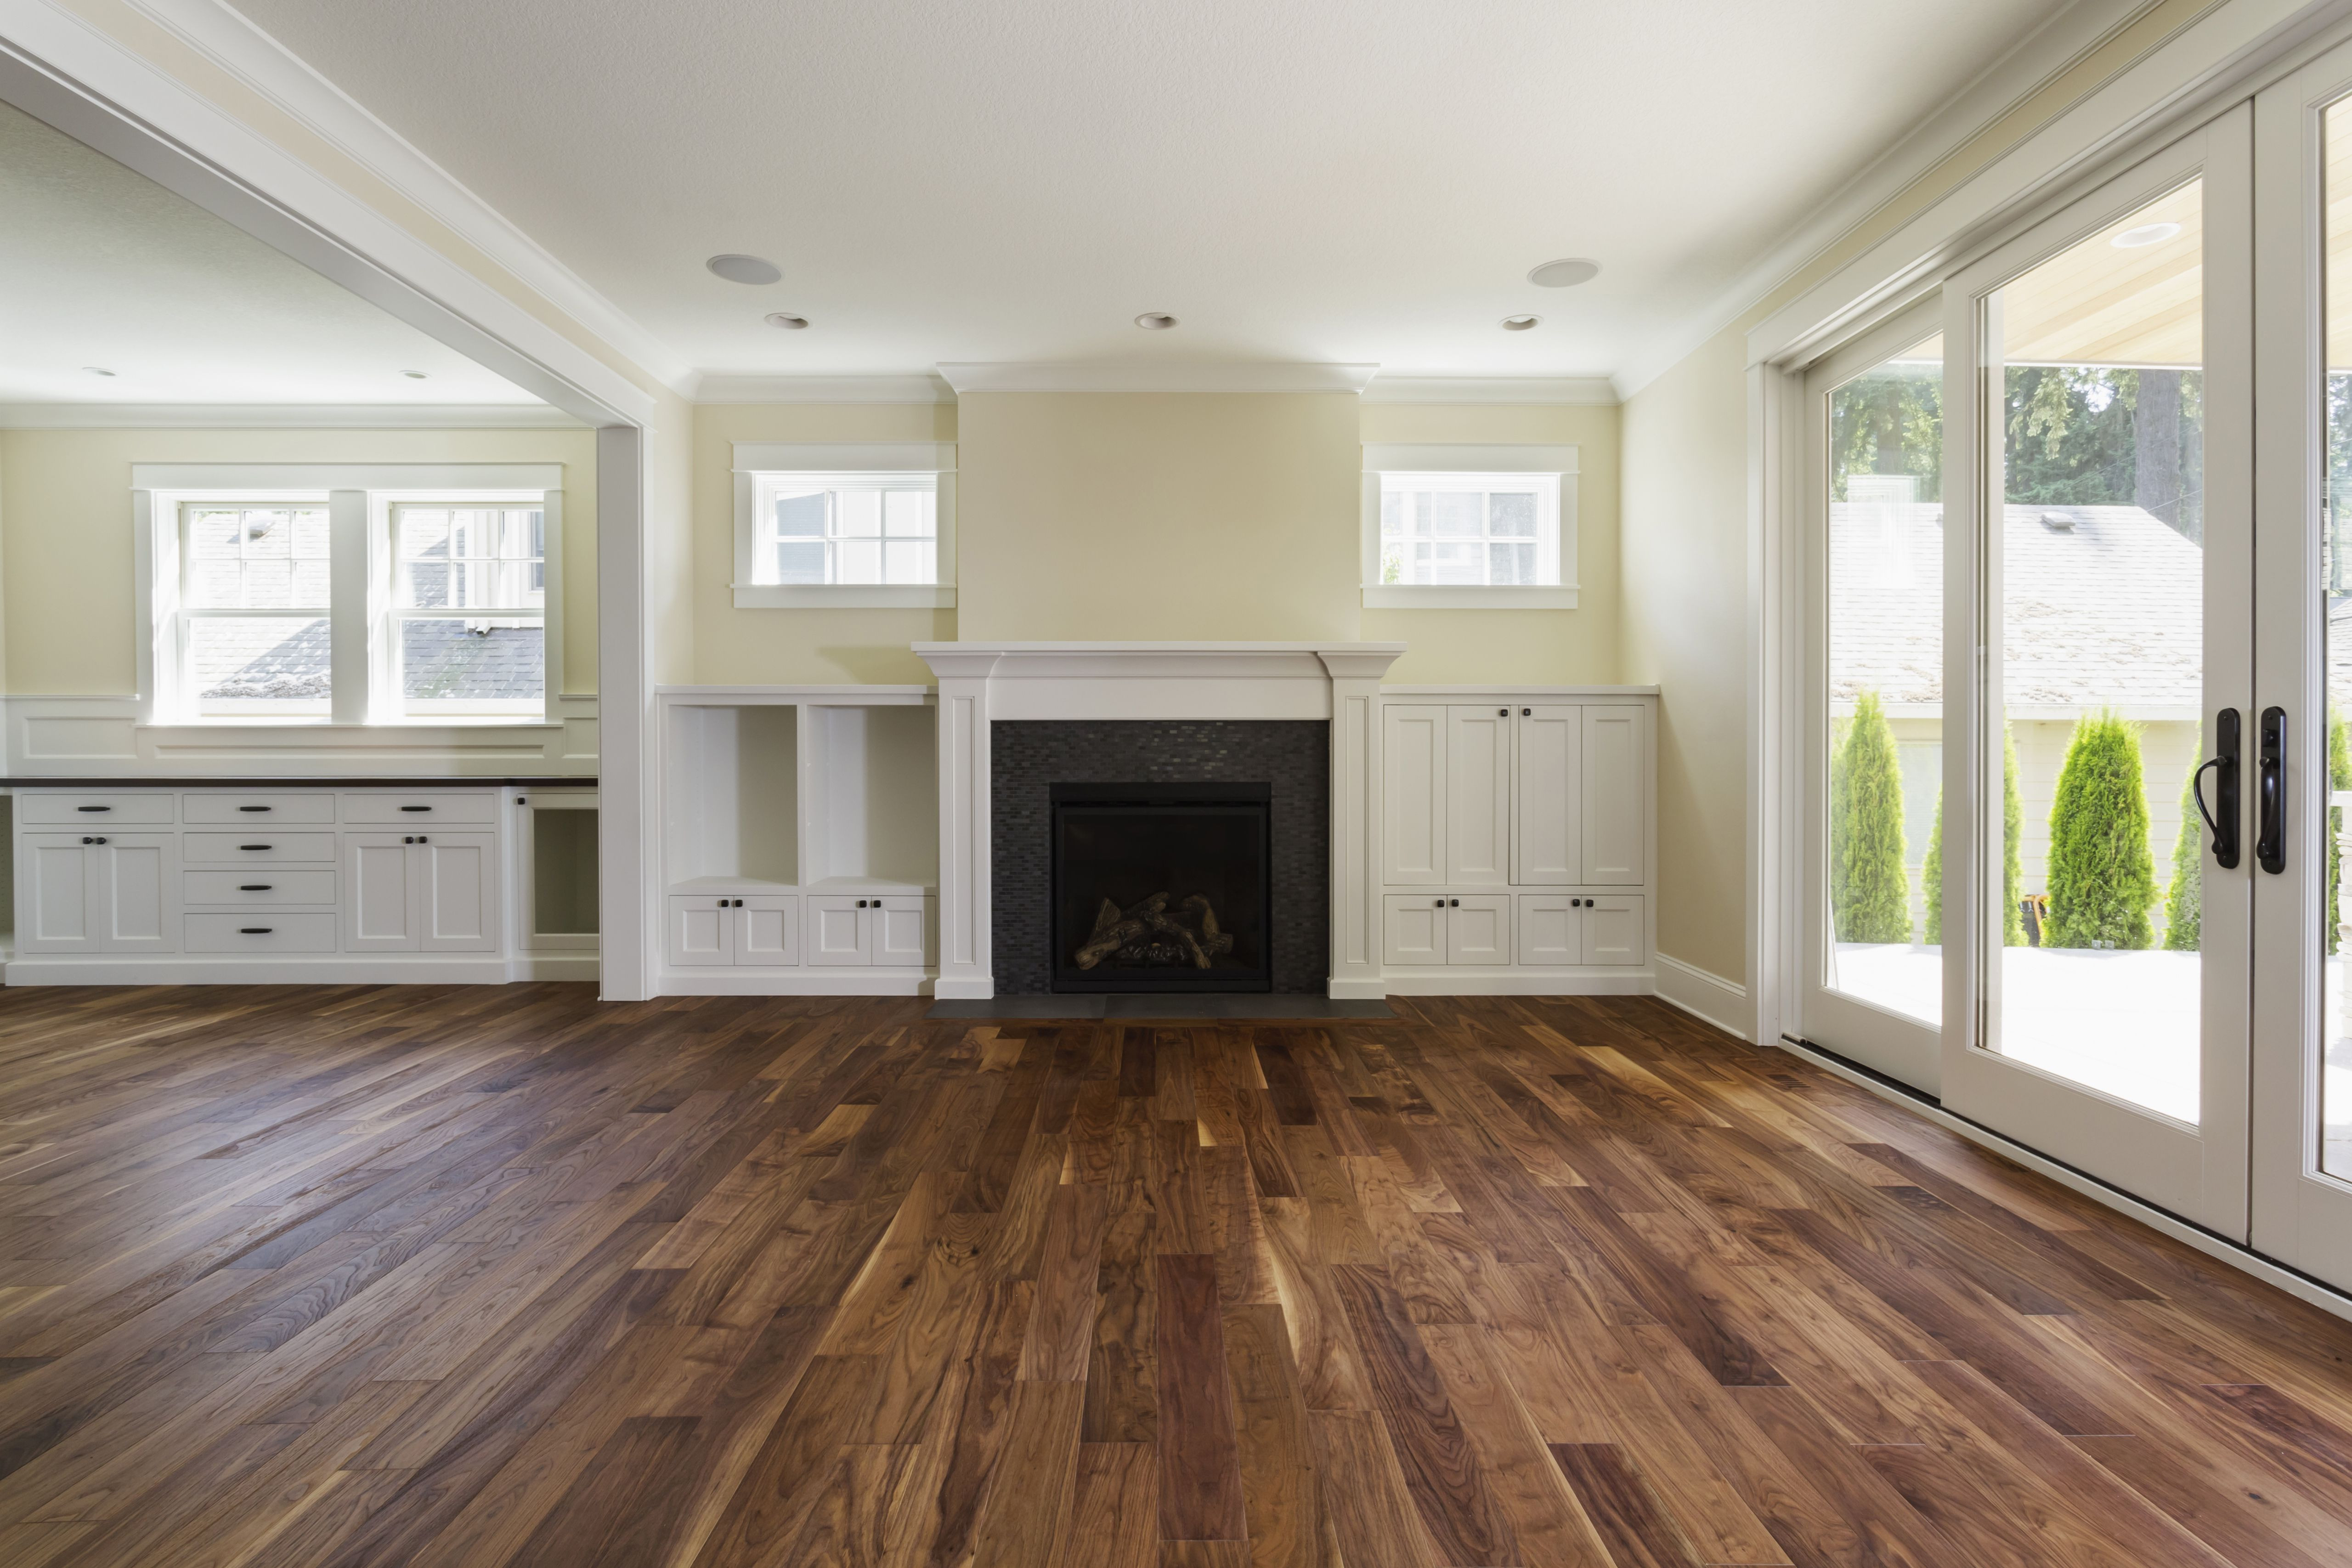 16 Stylish Hardwood Floor Curved Edge 2024 free download hardwood floor curved edge of the pros and cons of prefinished hardwood flooring intended for fireplace and built in shelves in living room 482143011 57bef8e33df78cc16e035397